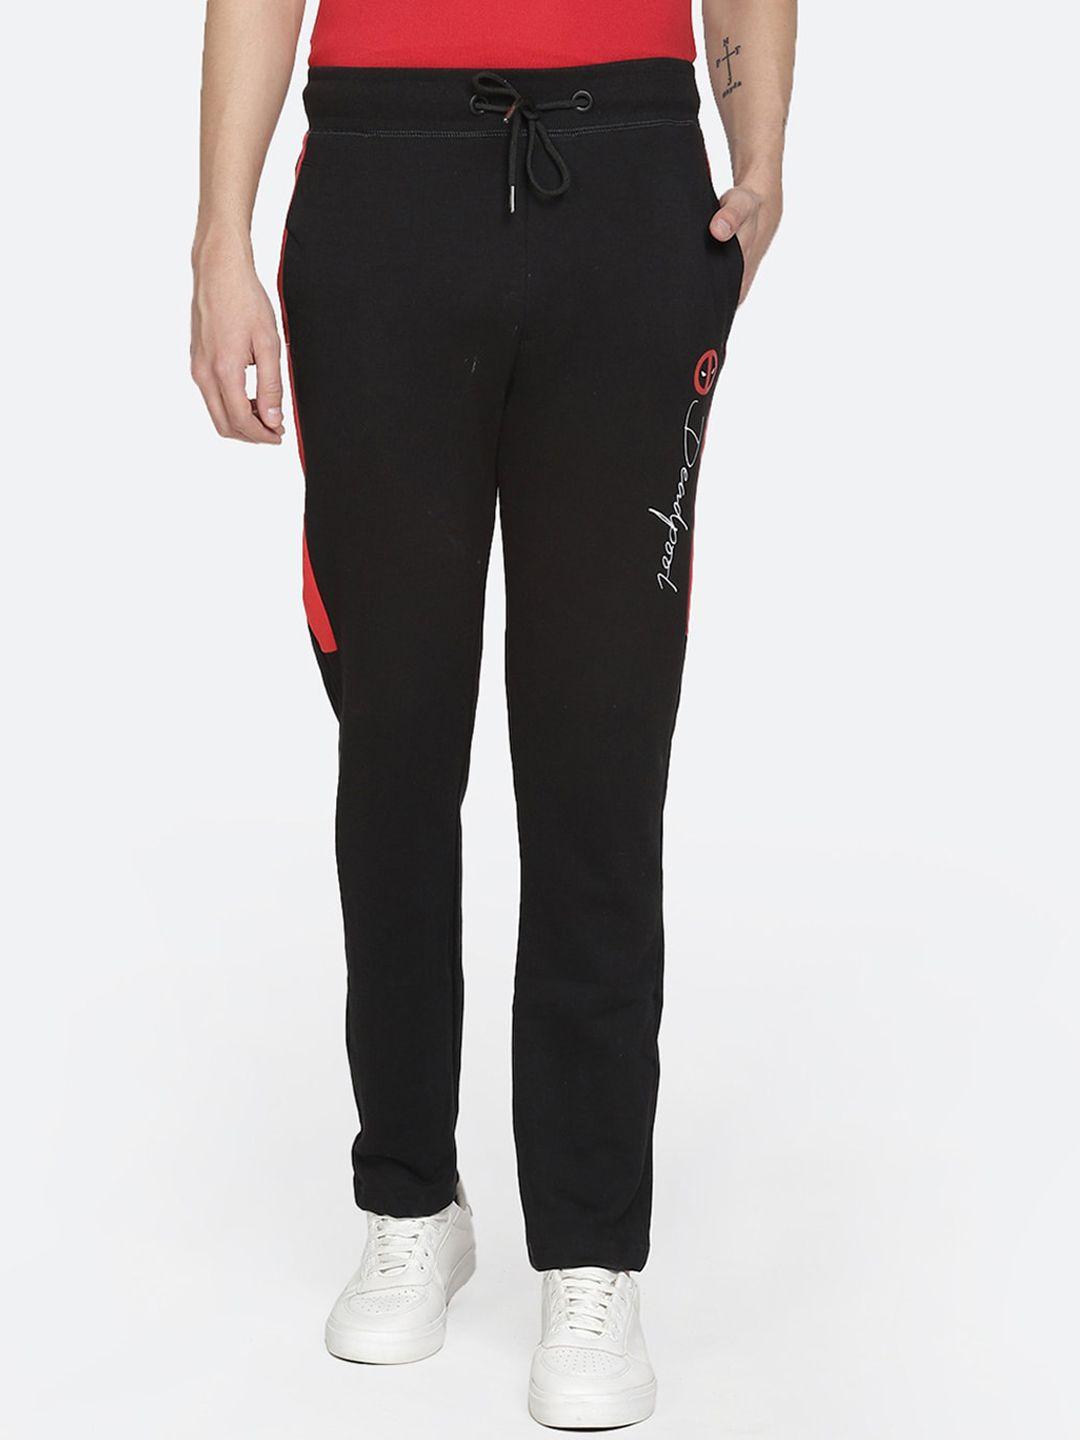 free-authority-men-black-&-red-deadpool-printed-slim-fit-pure-cotton-track-pants